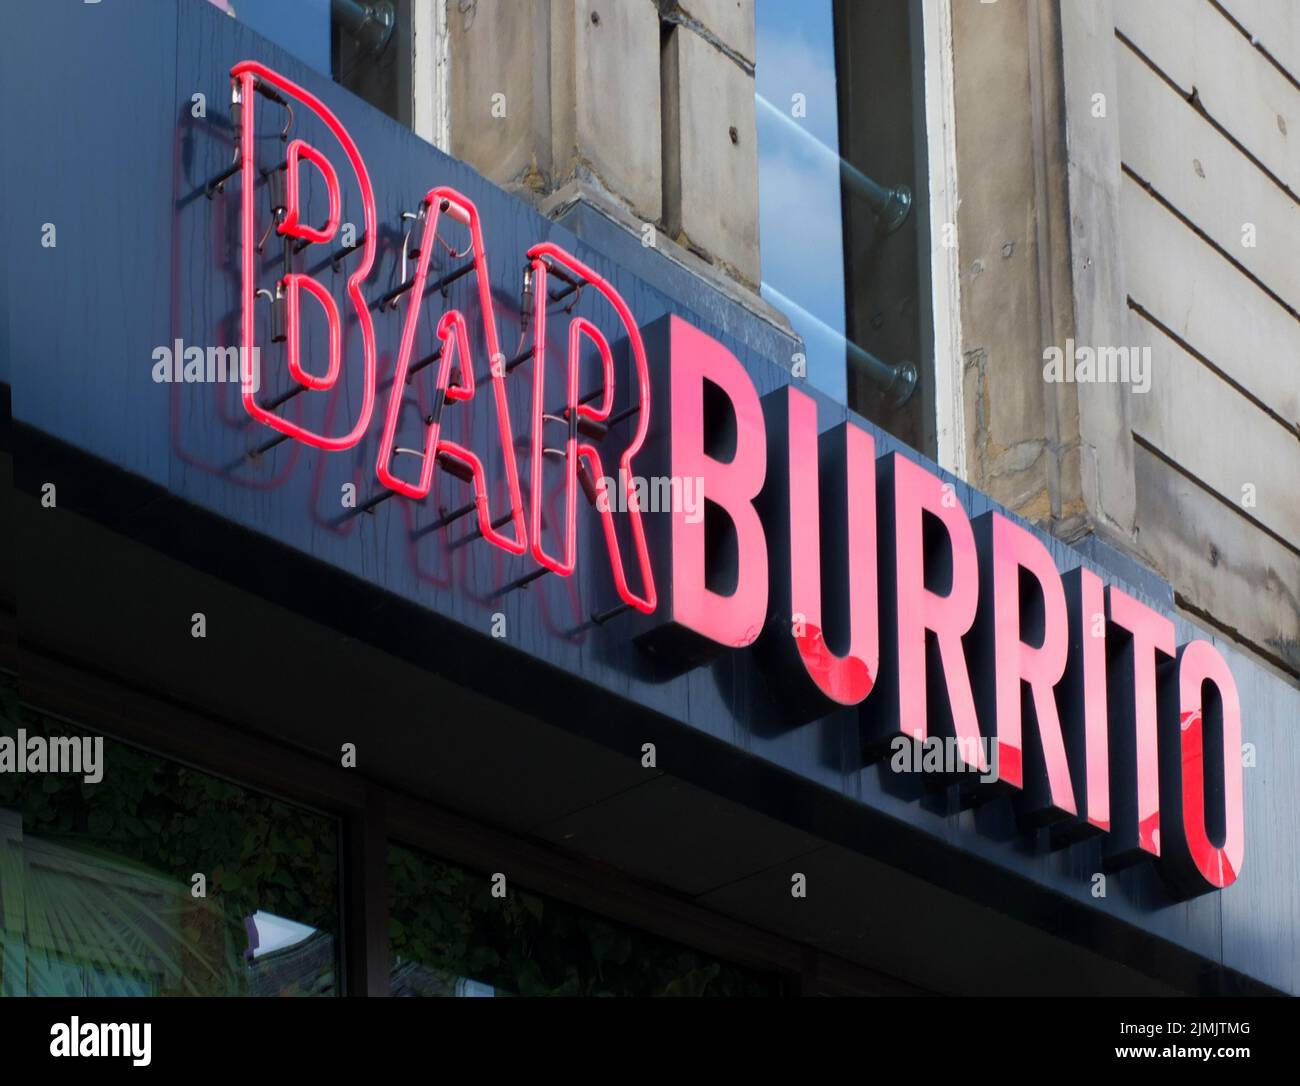 Sign above a bar burrito in leeds city centre Stock Photo